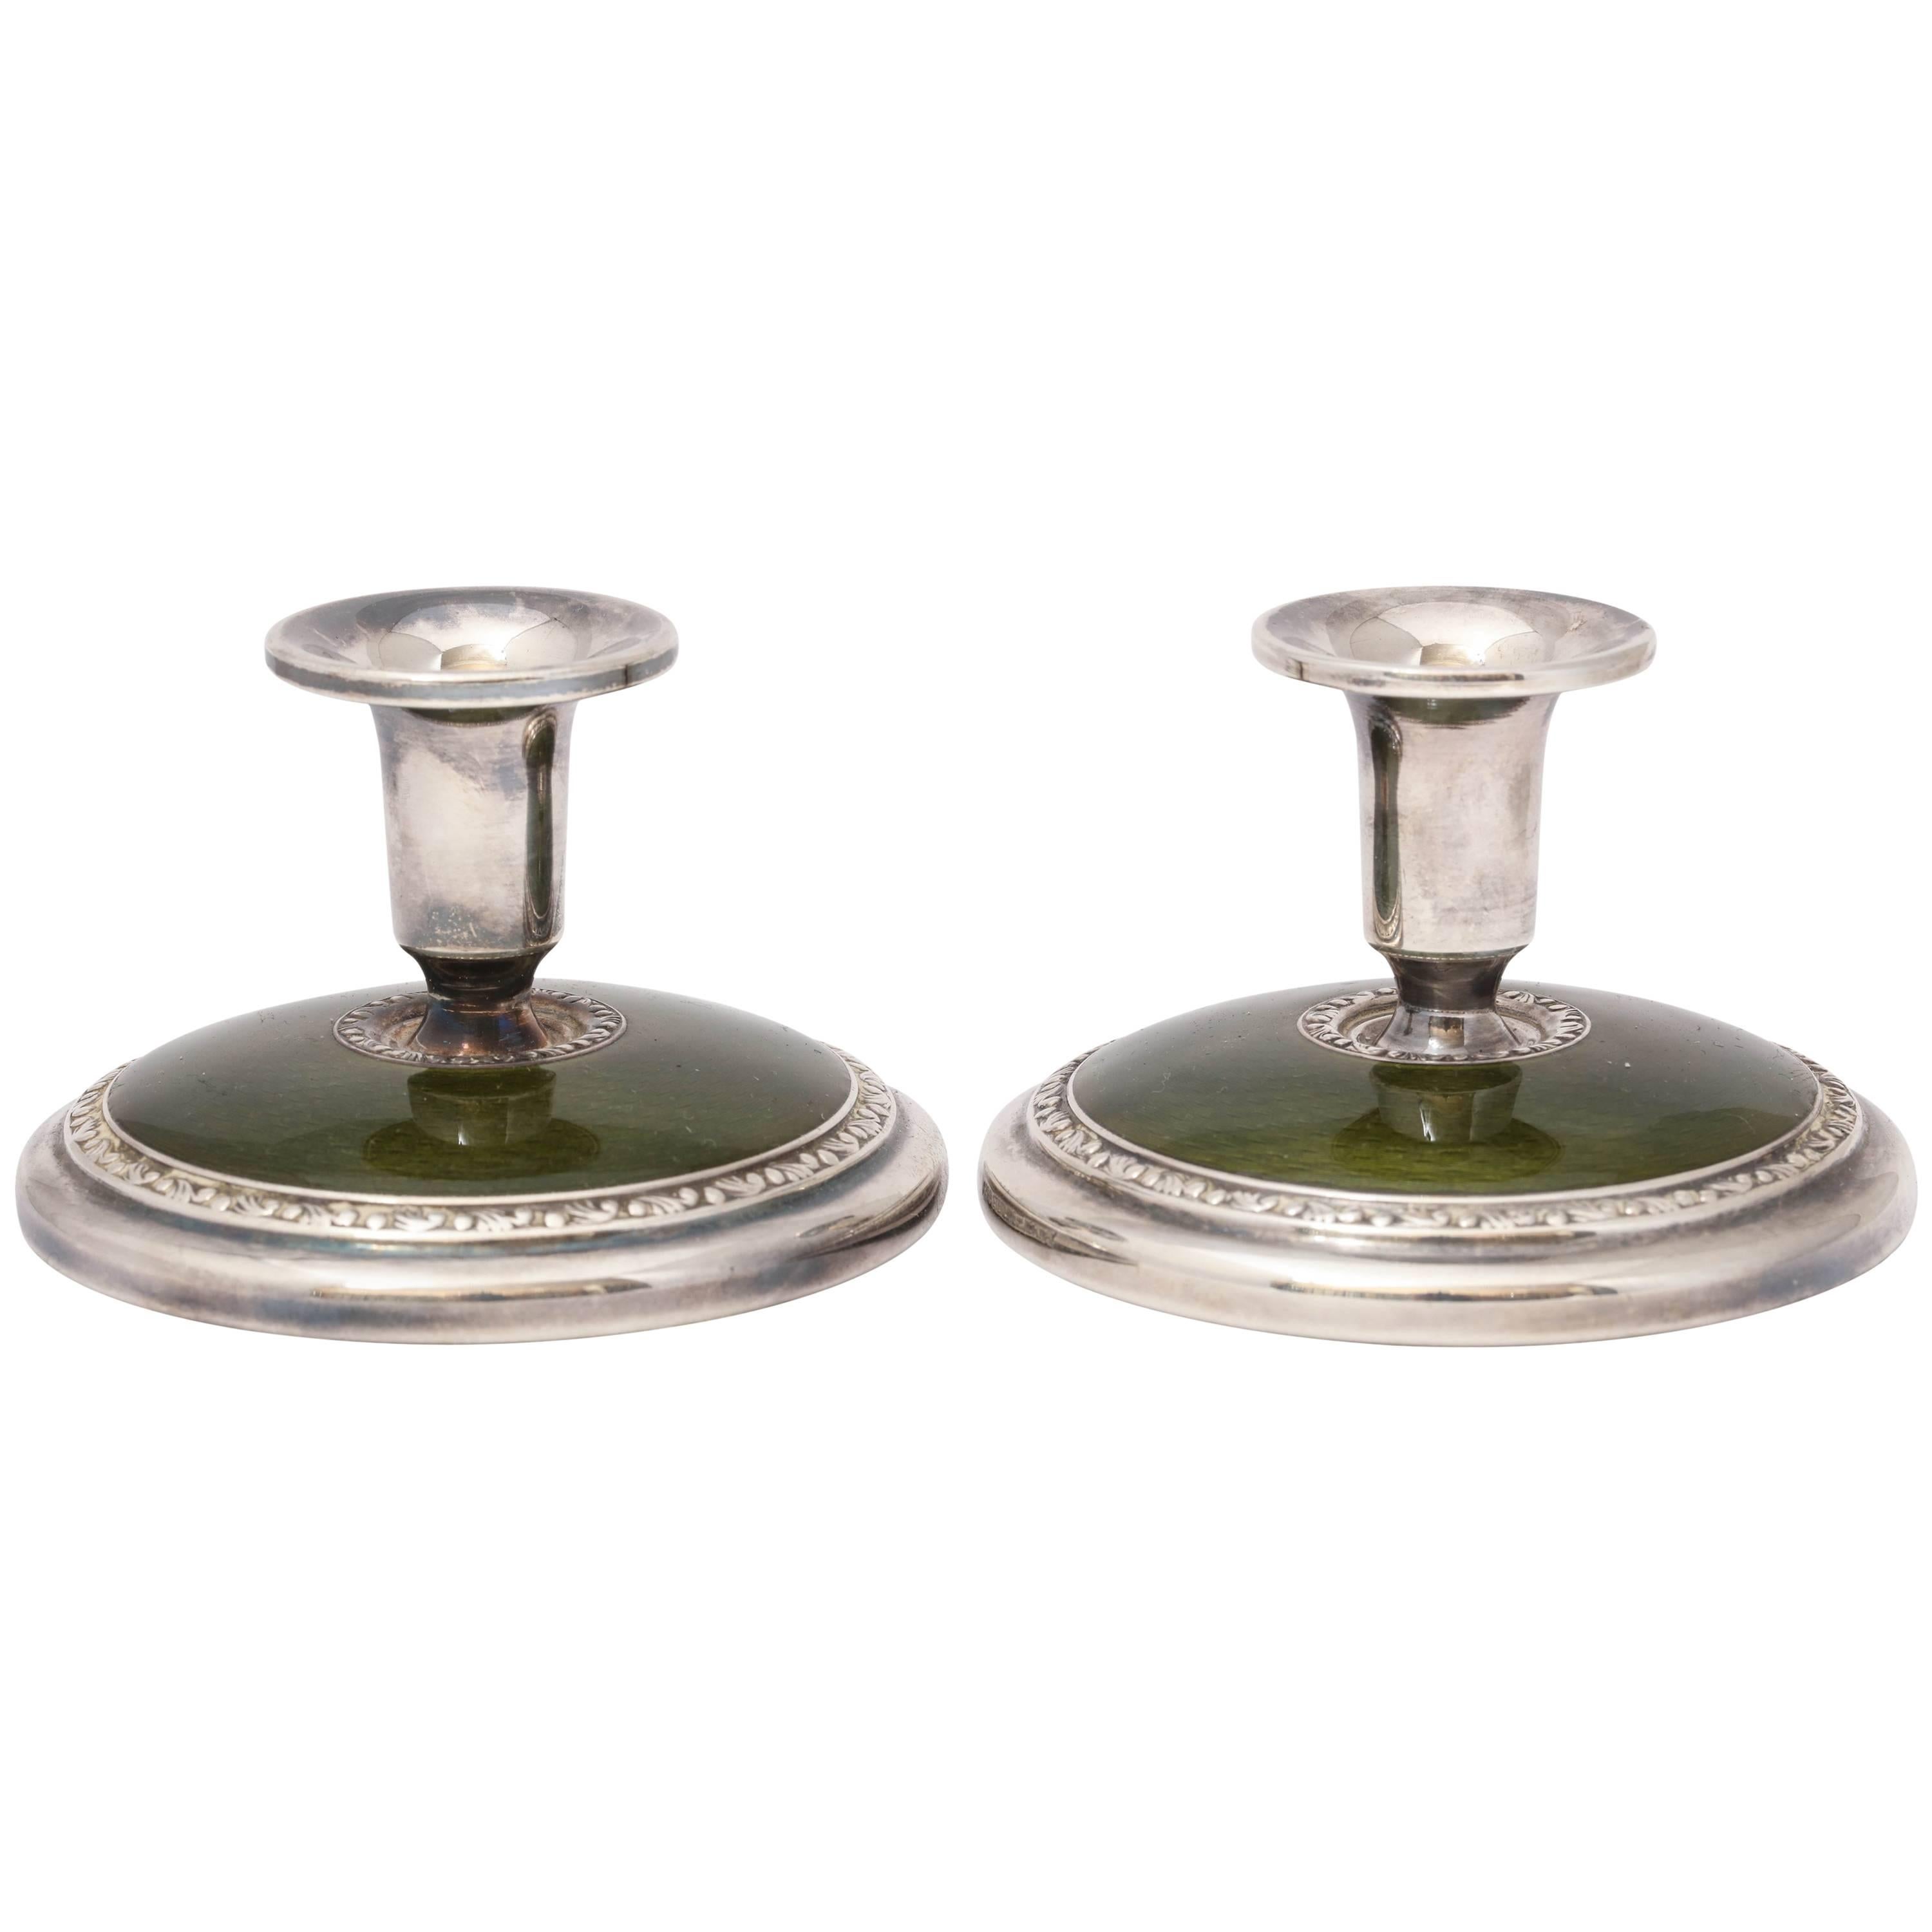 Pair of Art Deco Sterling Silver and Olive Green Guilloche Enamel Candlesticks